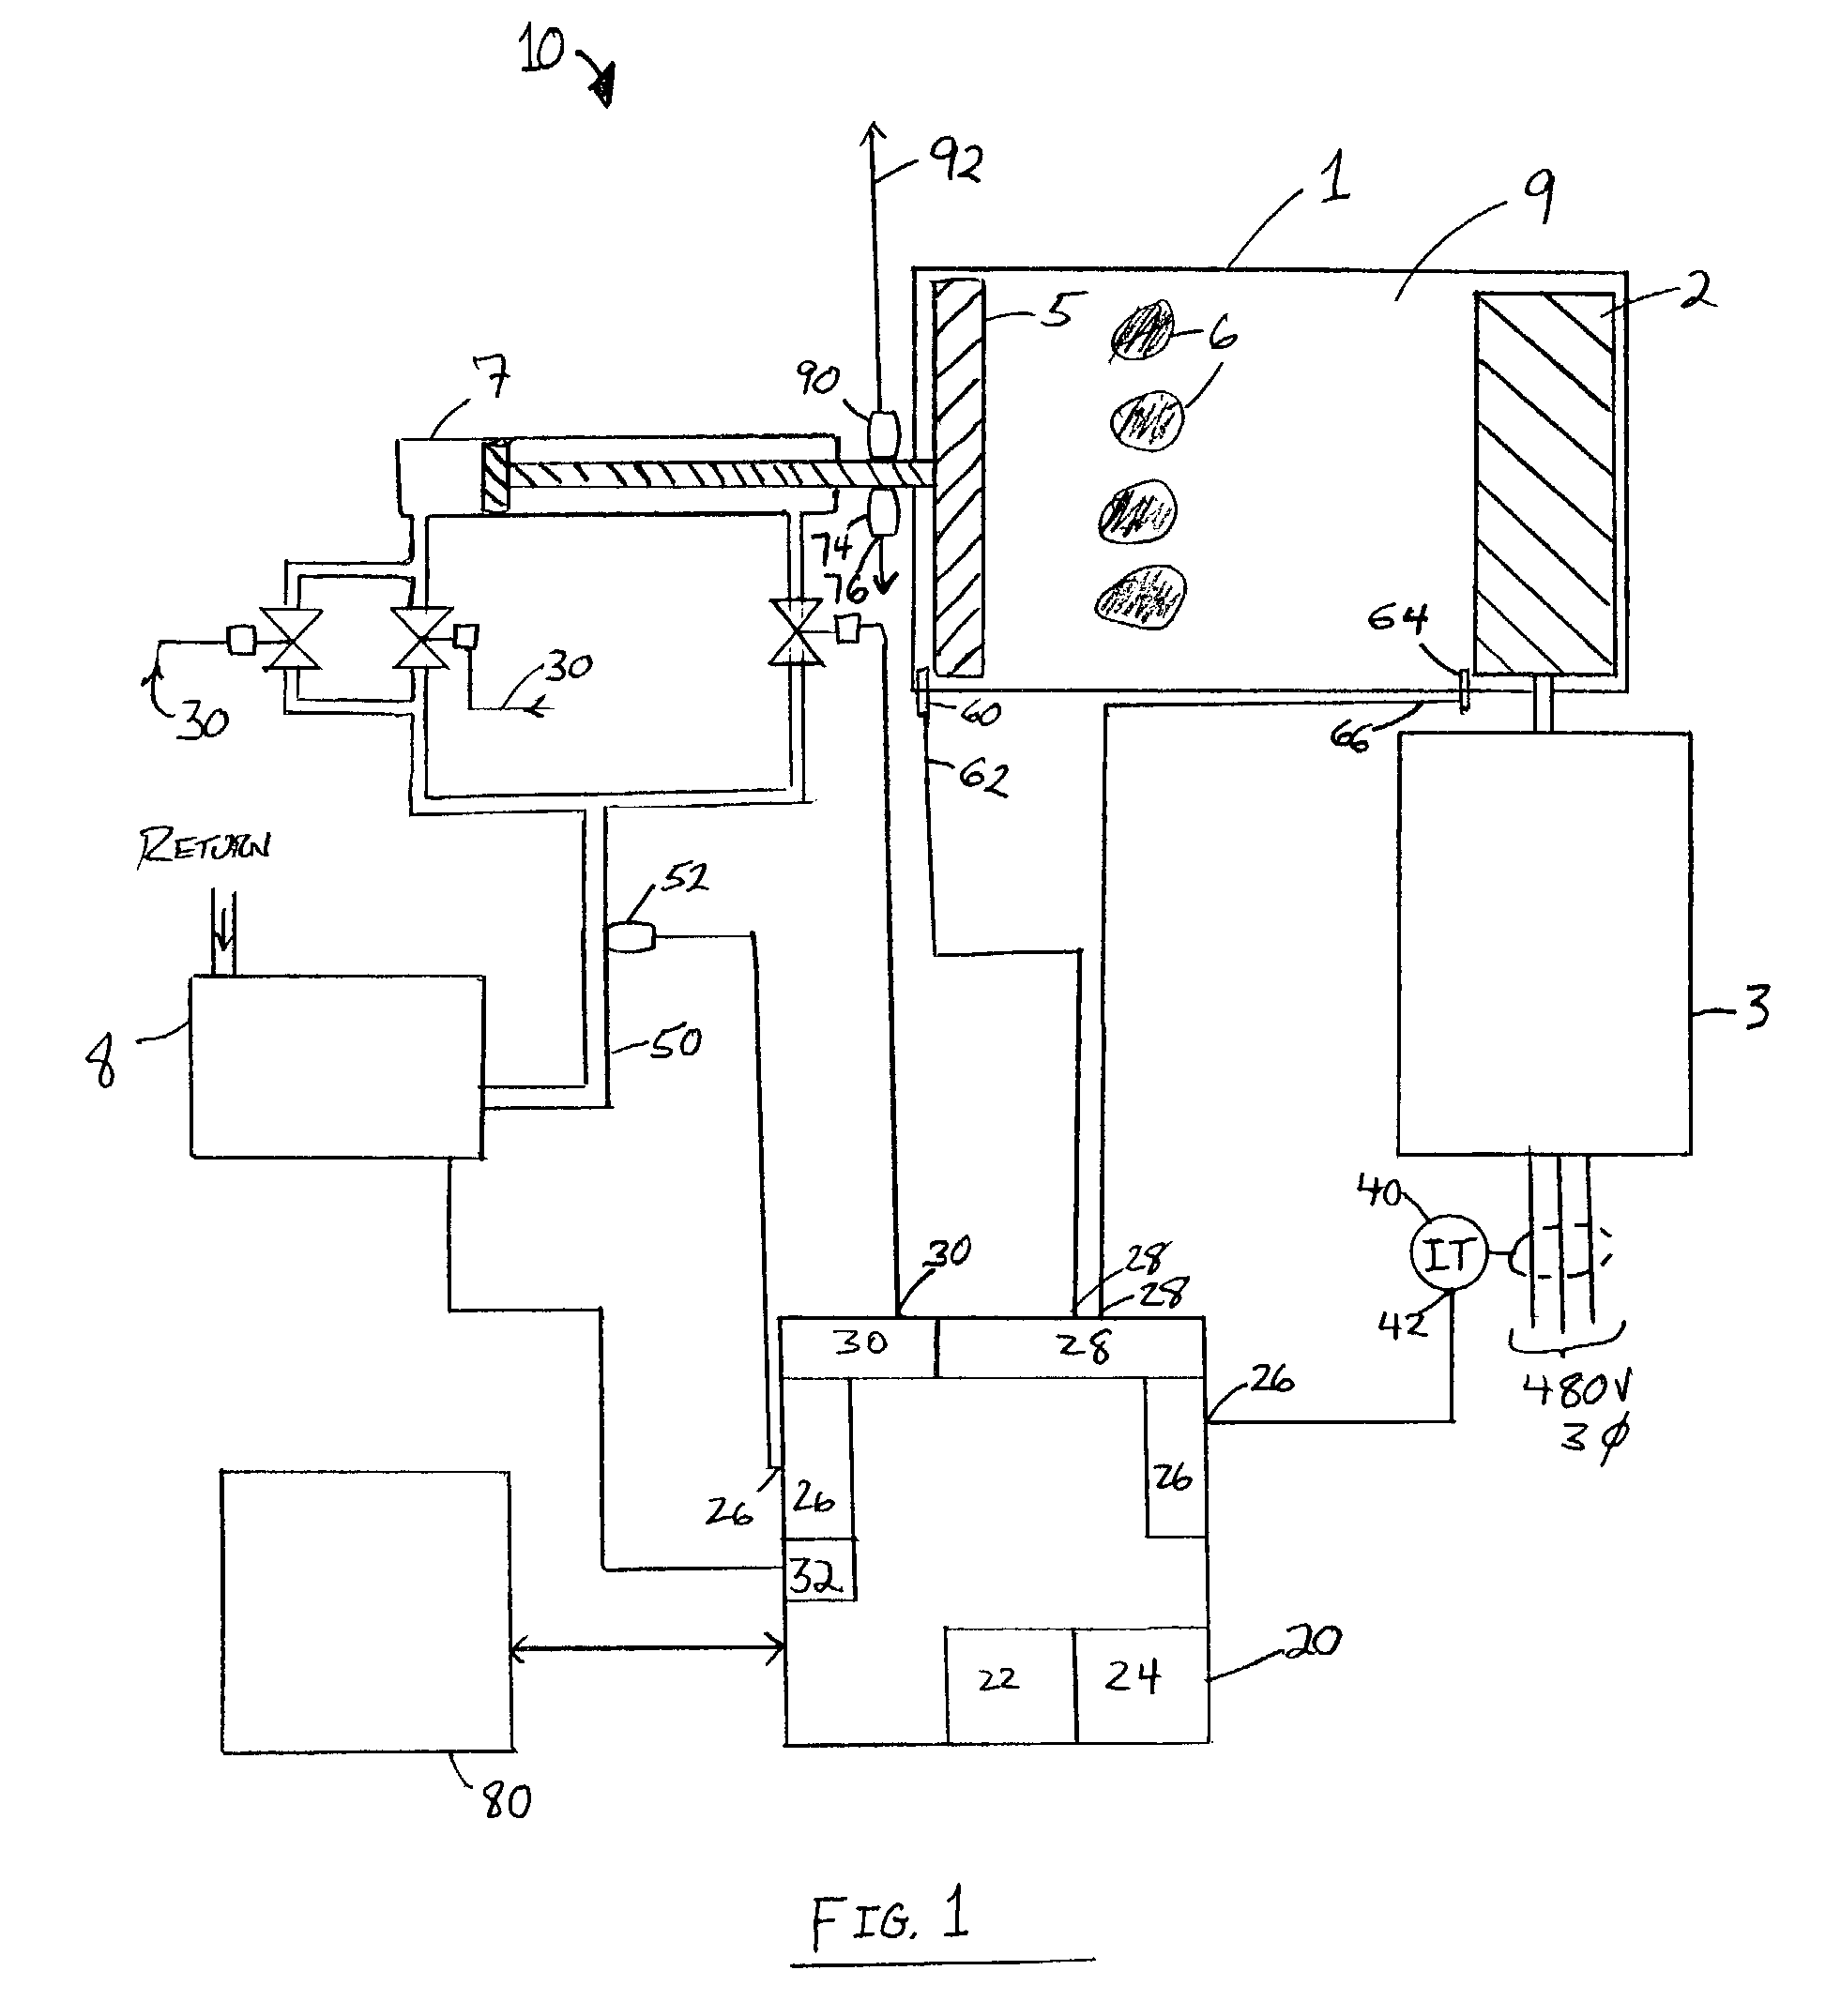 Rotary grinder control system and method